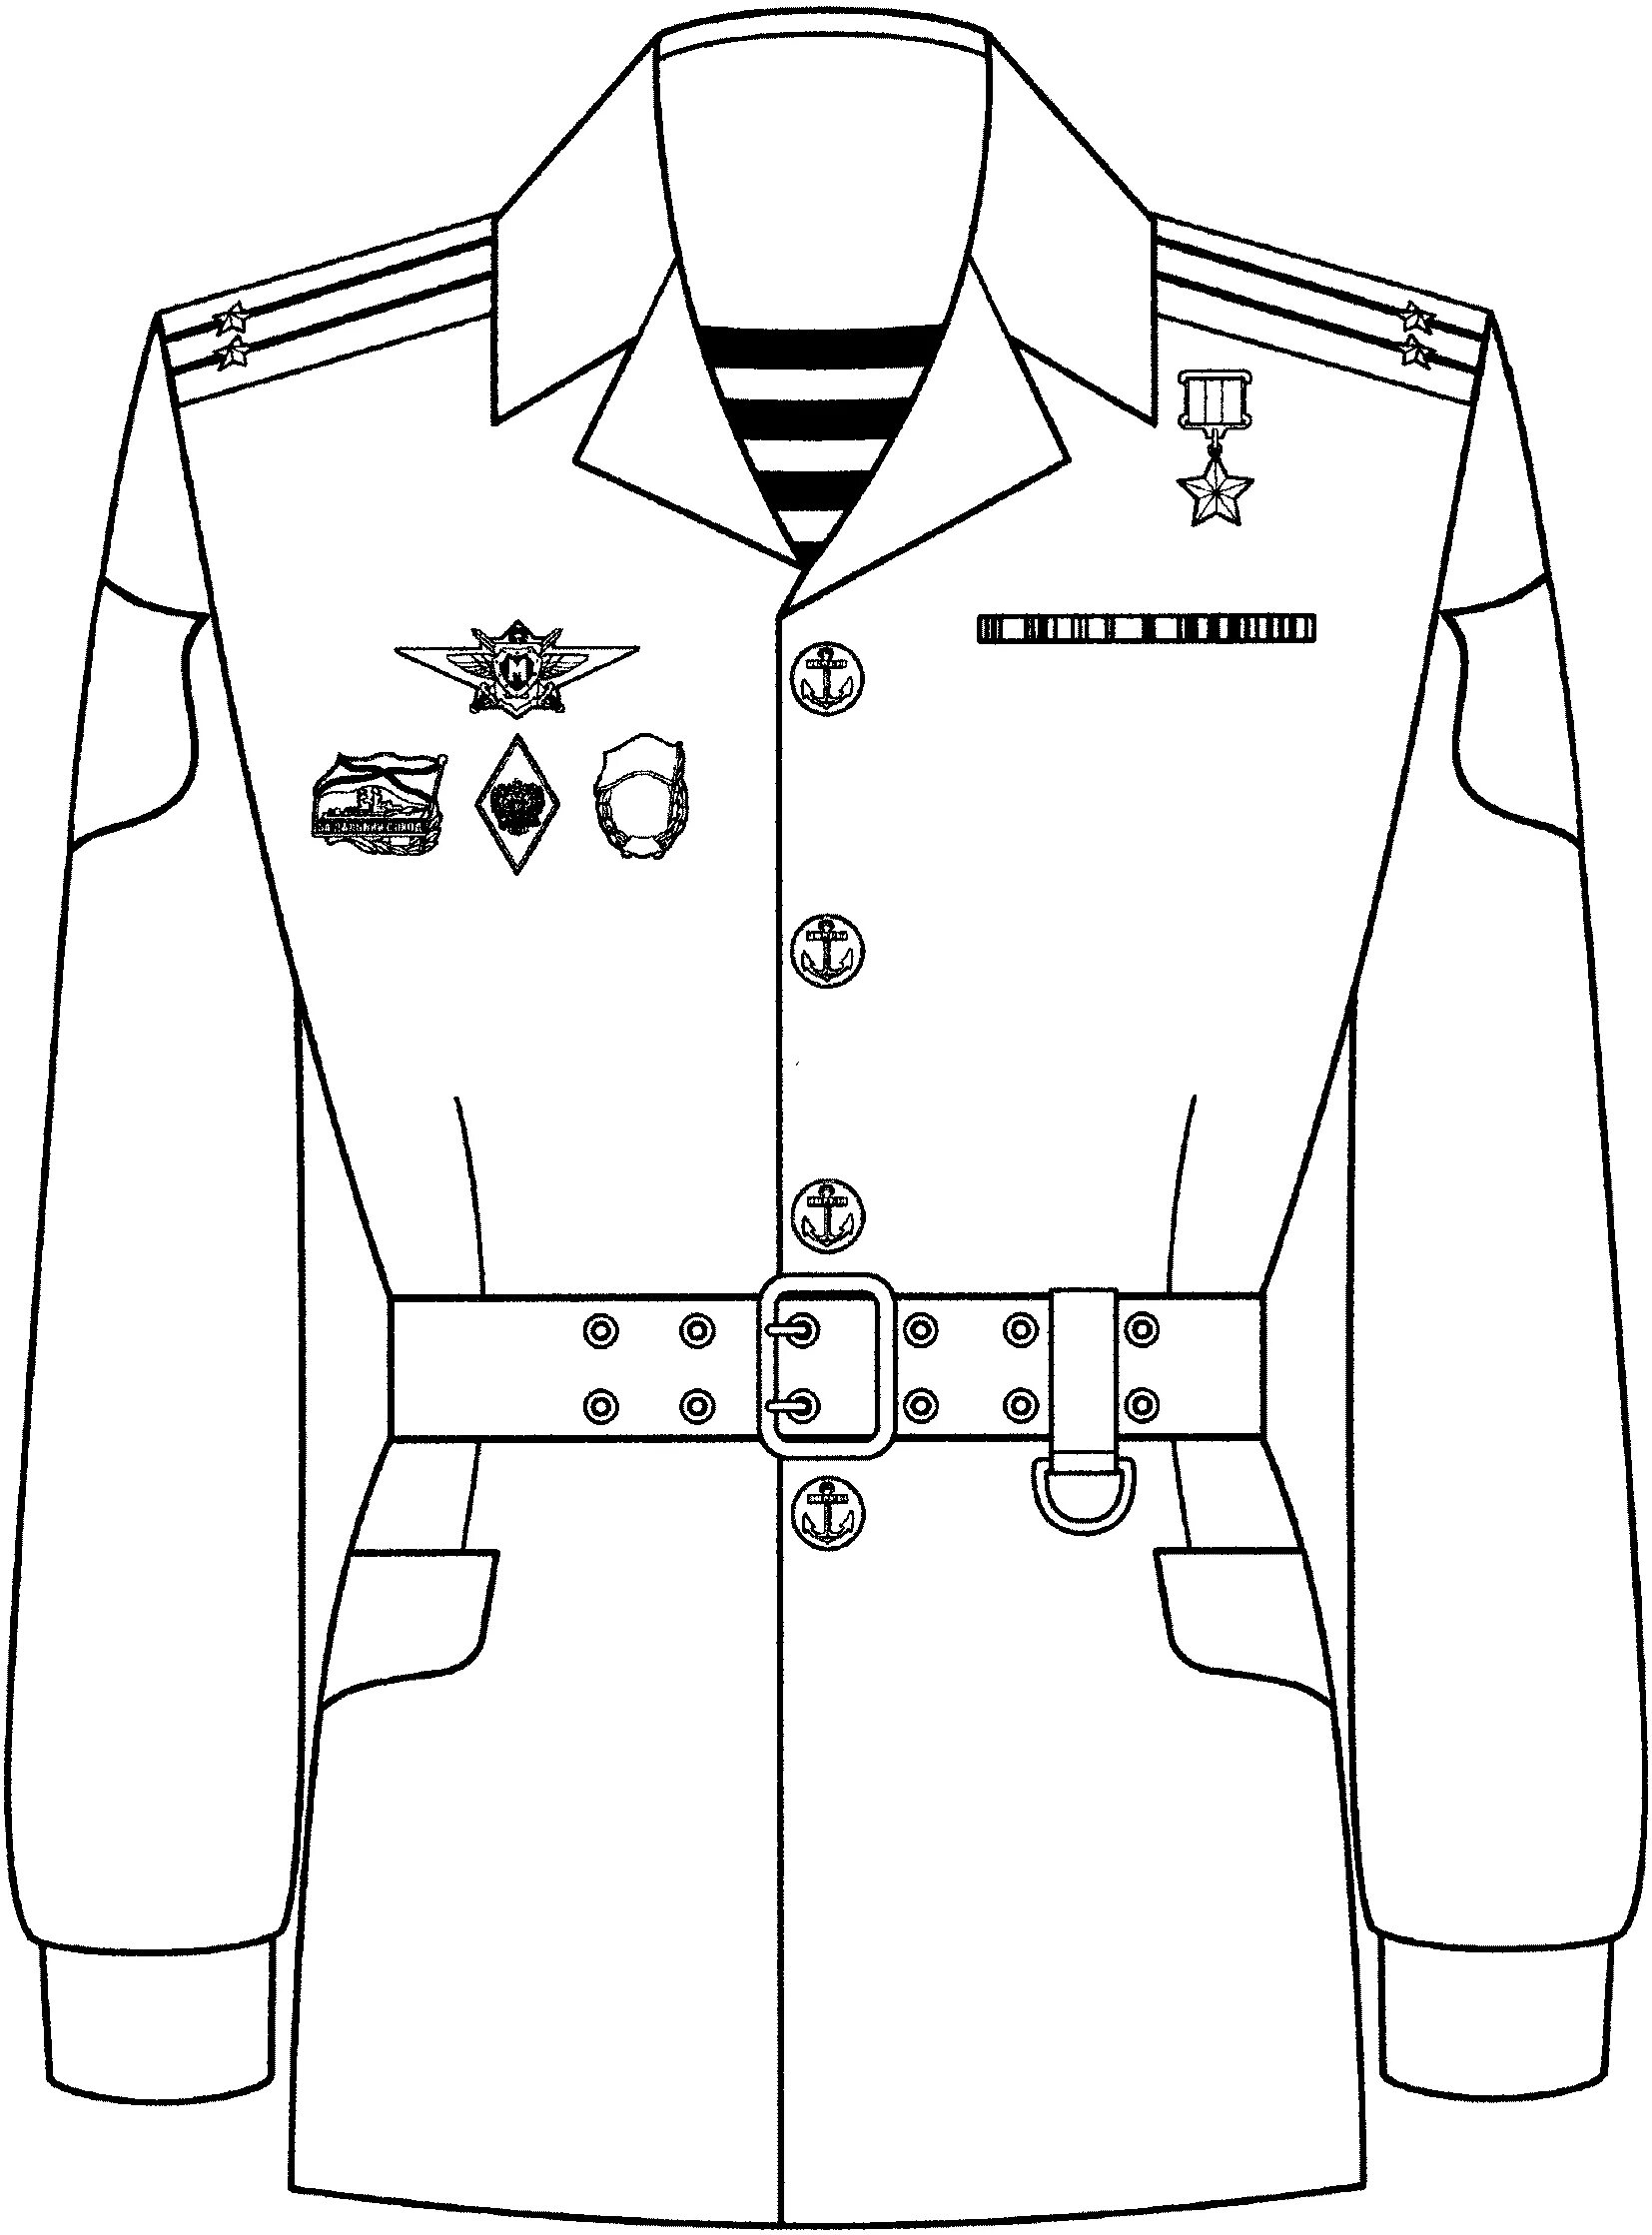 Military clothes #3